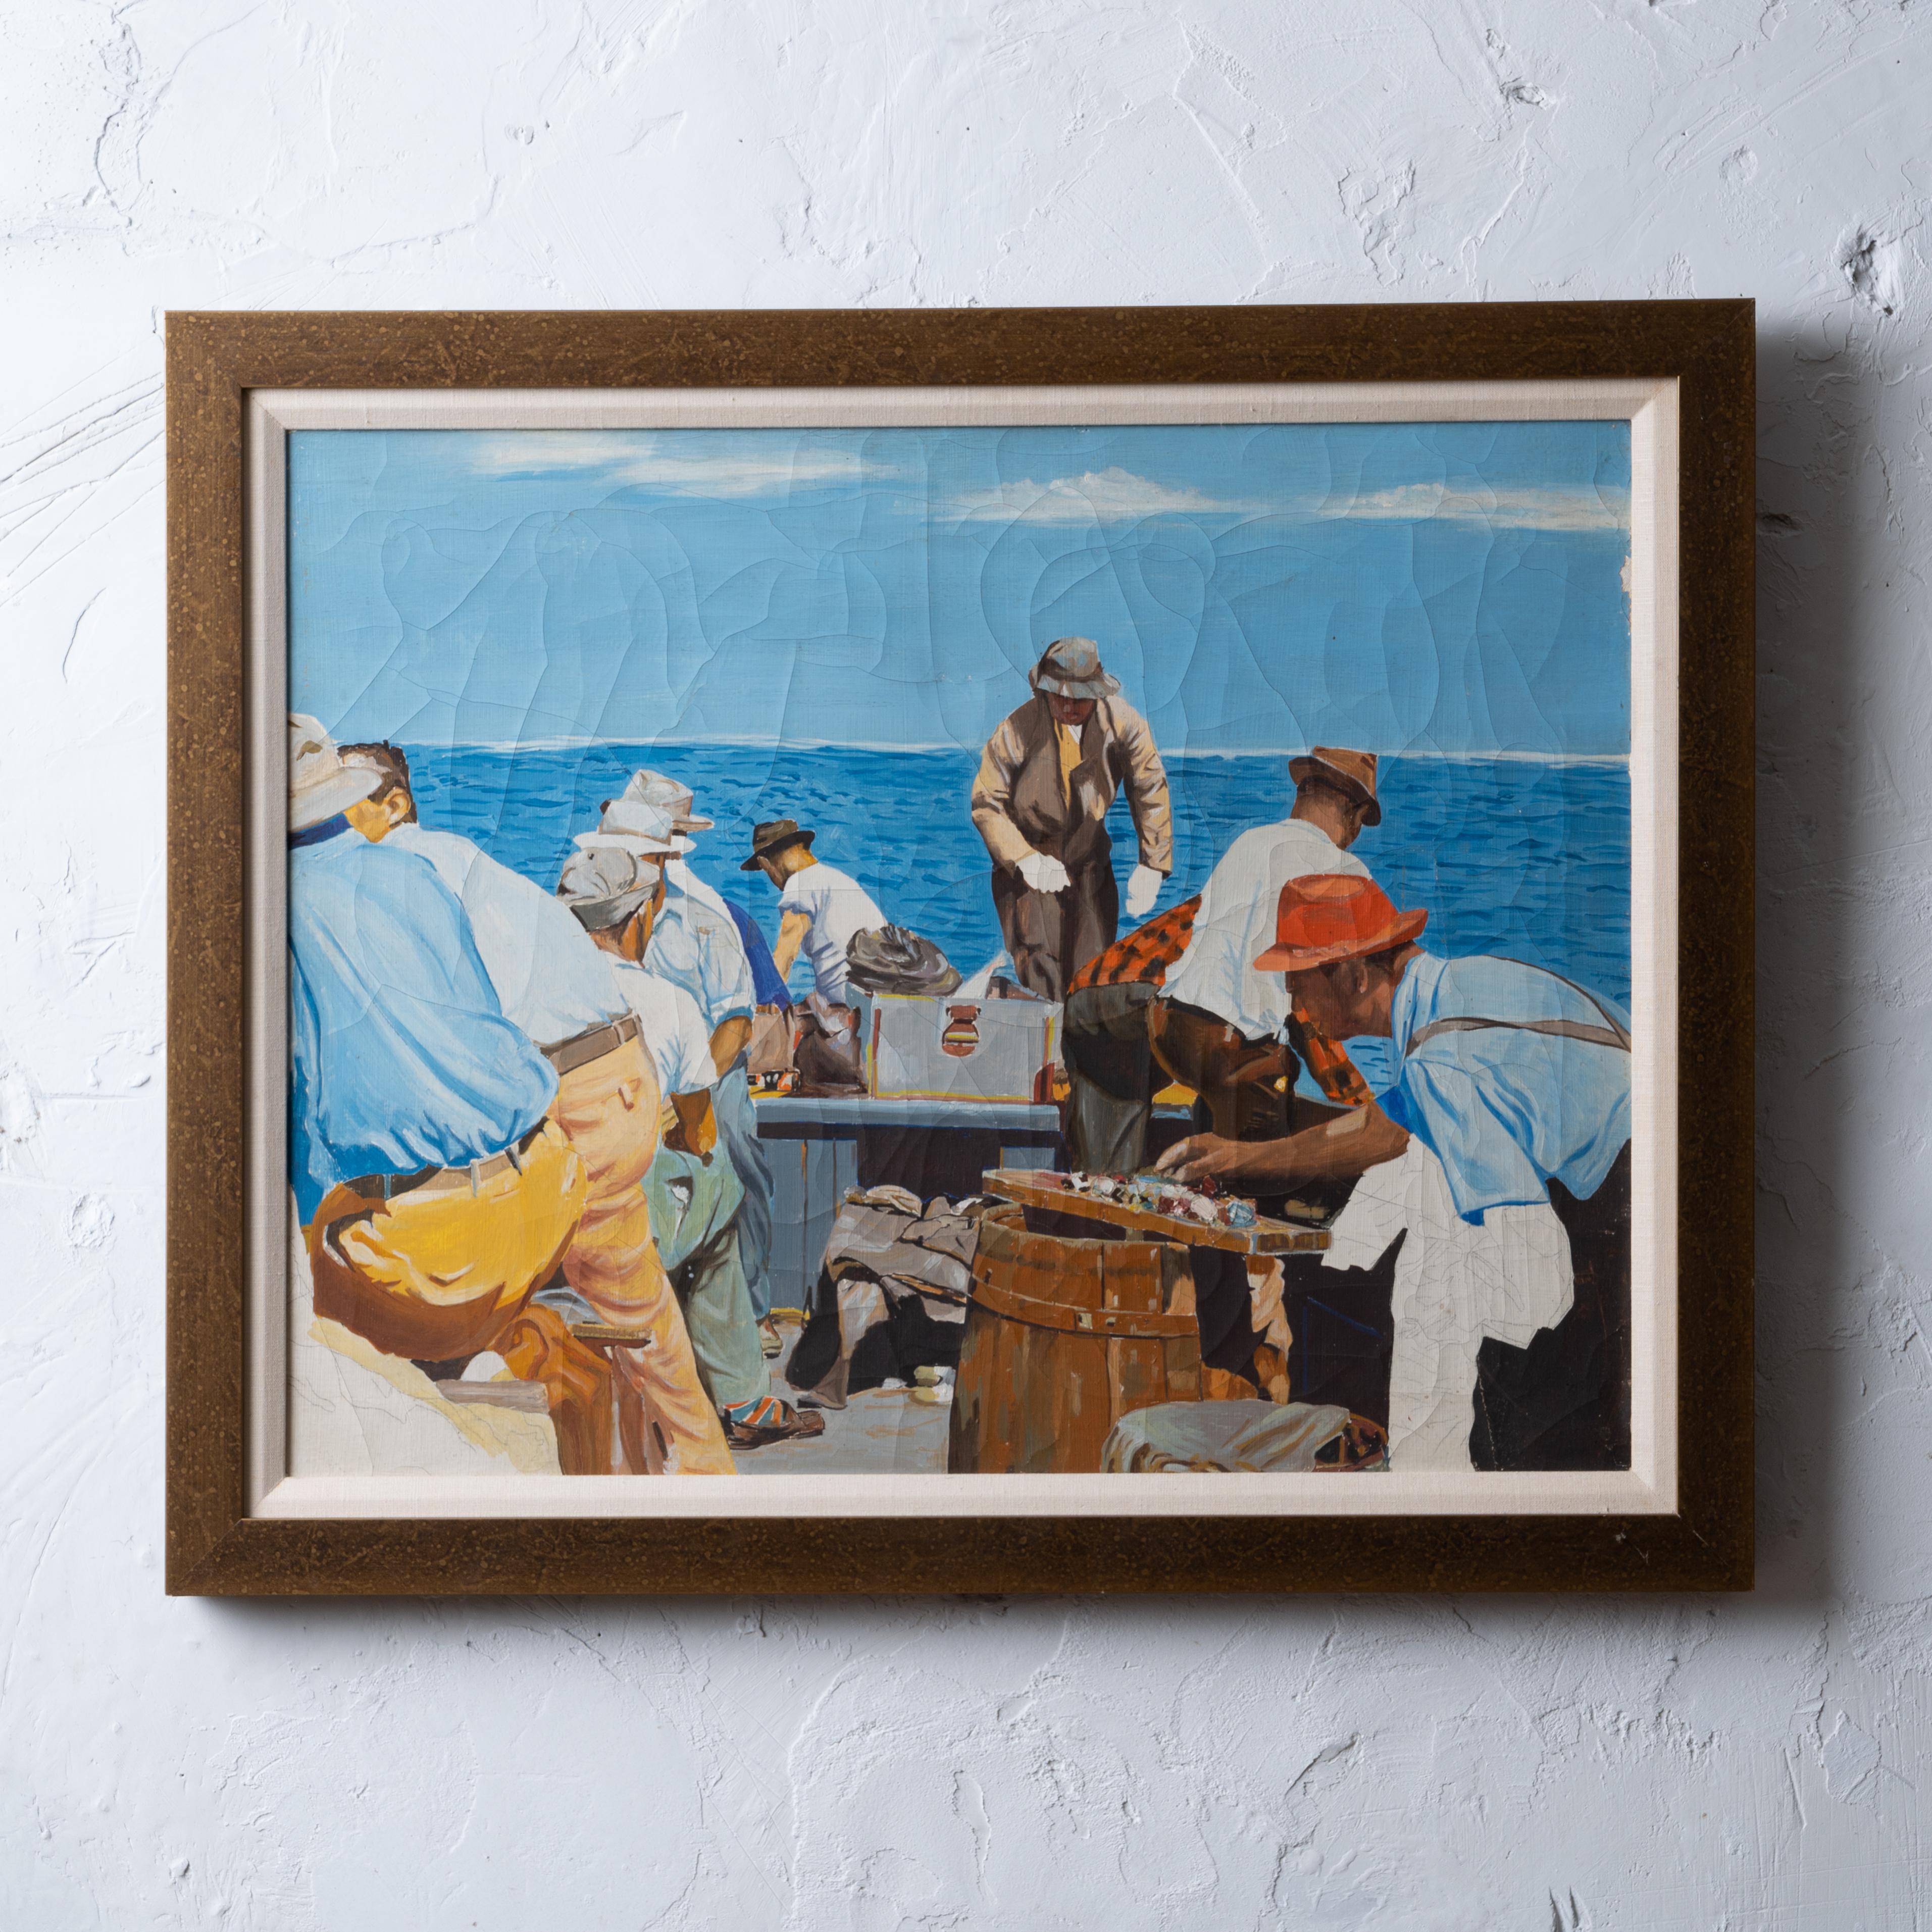 An oil on canvas of a fishing charter boat at sea with fishermen.  Likely an illustration for a publication circa 1940s.

canvas: 27 by 21 inches
frame: 31 by 25 inches

Fair overall with unfinished portions and craquelure.